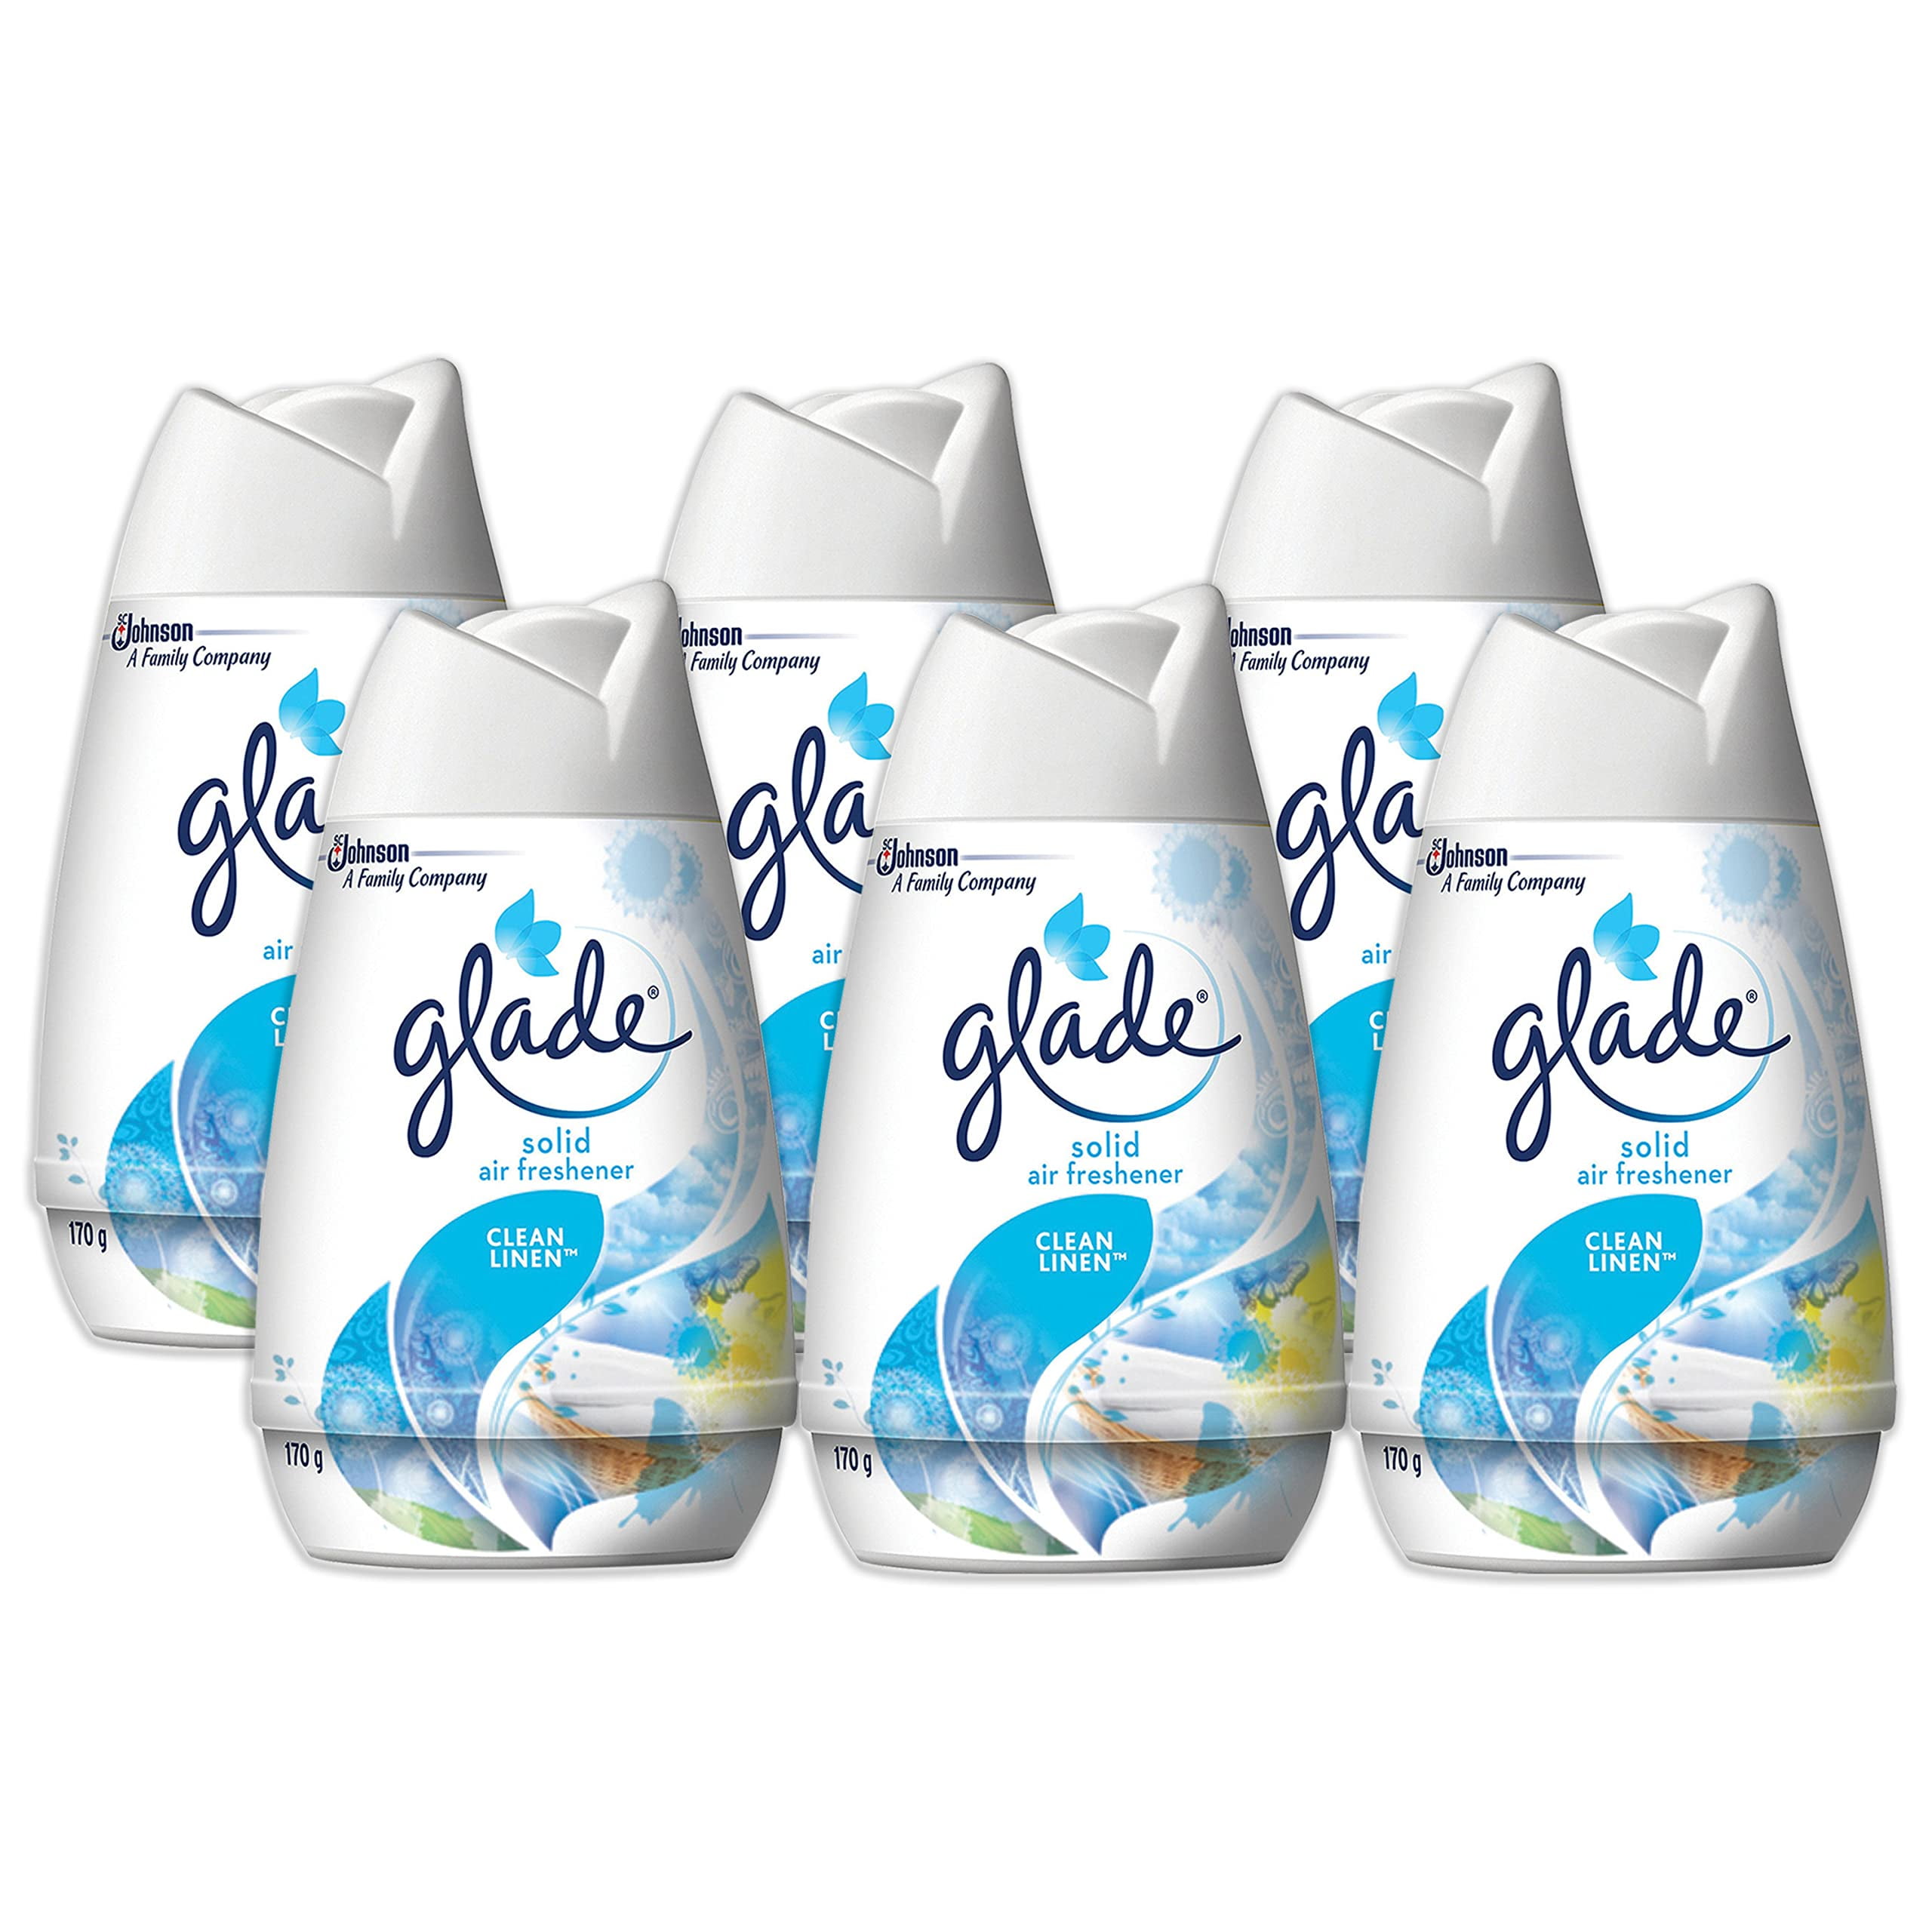 Glade Solid Air Freshener Cashmere Woods 6oz. 2 Pack NEW